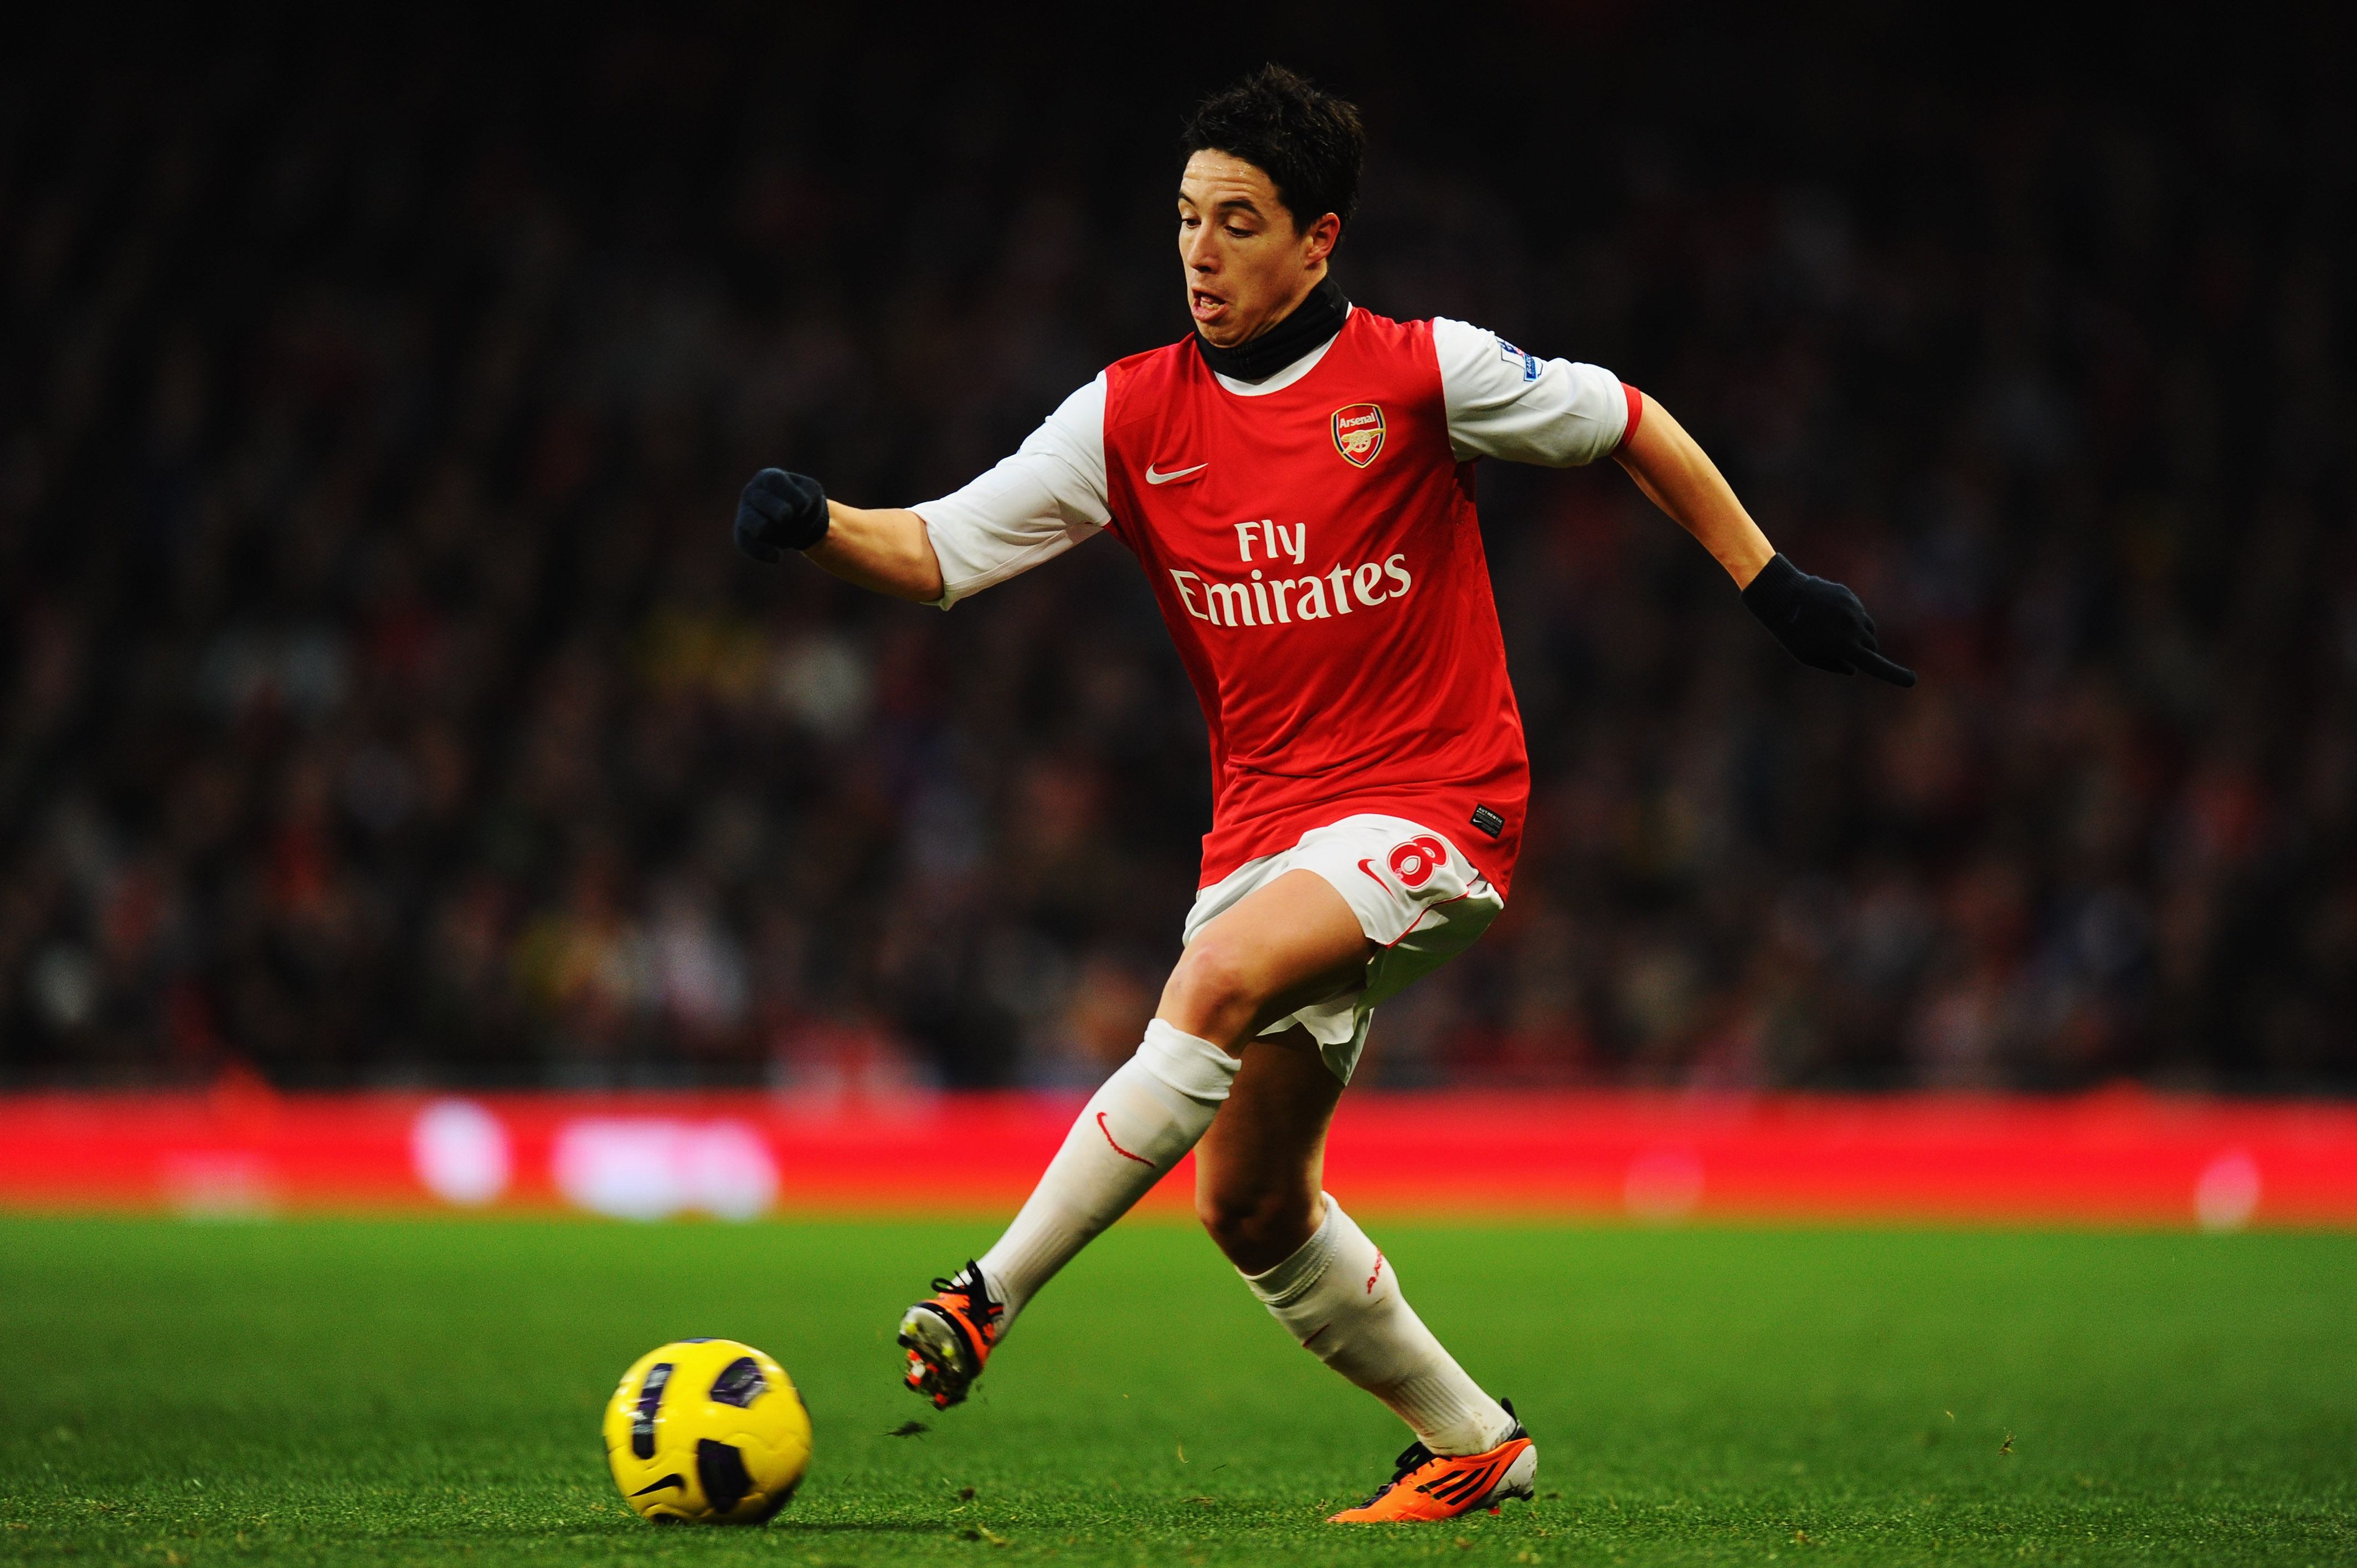 LONDON, UNITED KINGDOM - JANUARY 22:  Samir Nasri of Arsenal runs with the ball during the Barclays Premier League match between Arsenal and Wigan Athletic at the Emirates Stadium on January 22, 2011 in London, England.  (Photo by Mike Hewitt/Getty Images